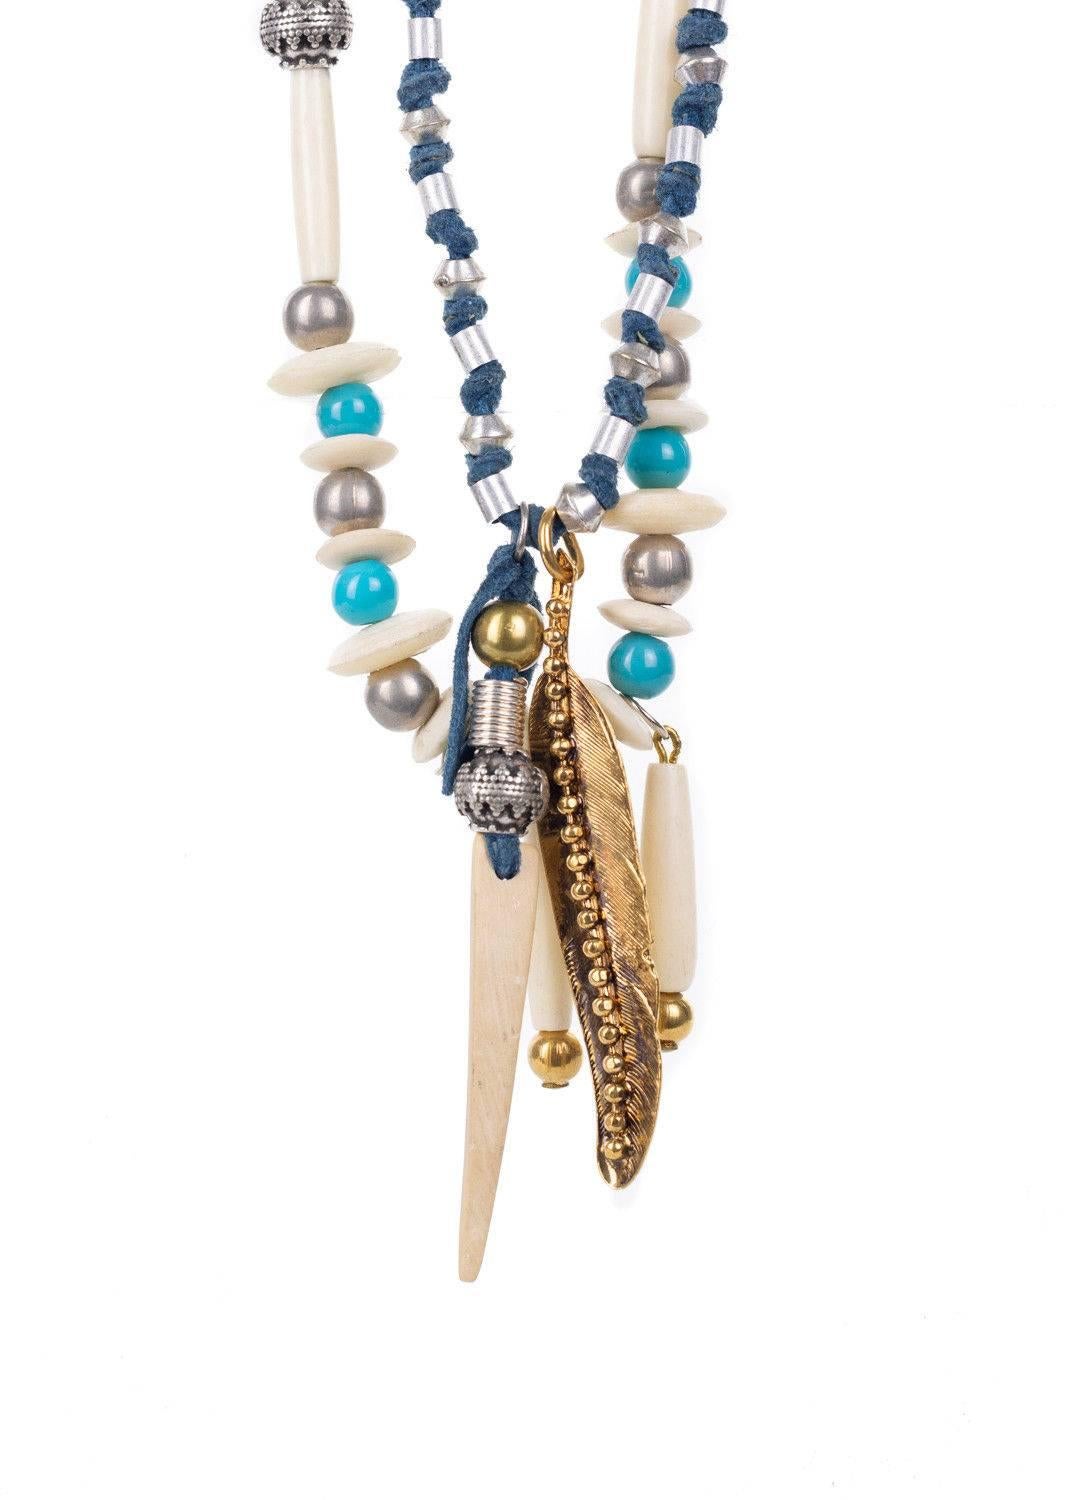 Get your Roberto Cavalli Necklace and add the perfect cultural touch to your ensemble. This necklace features a curbed chain, metal applique adorned blue fabric, metal beads and wood feather pendants. You can pair this necklace with an all white